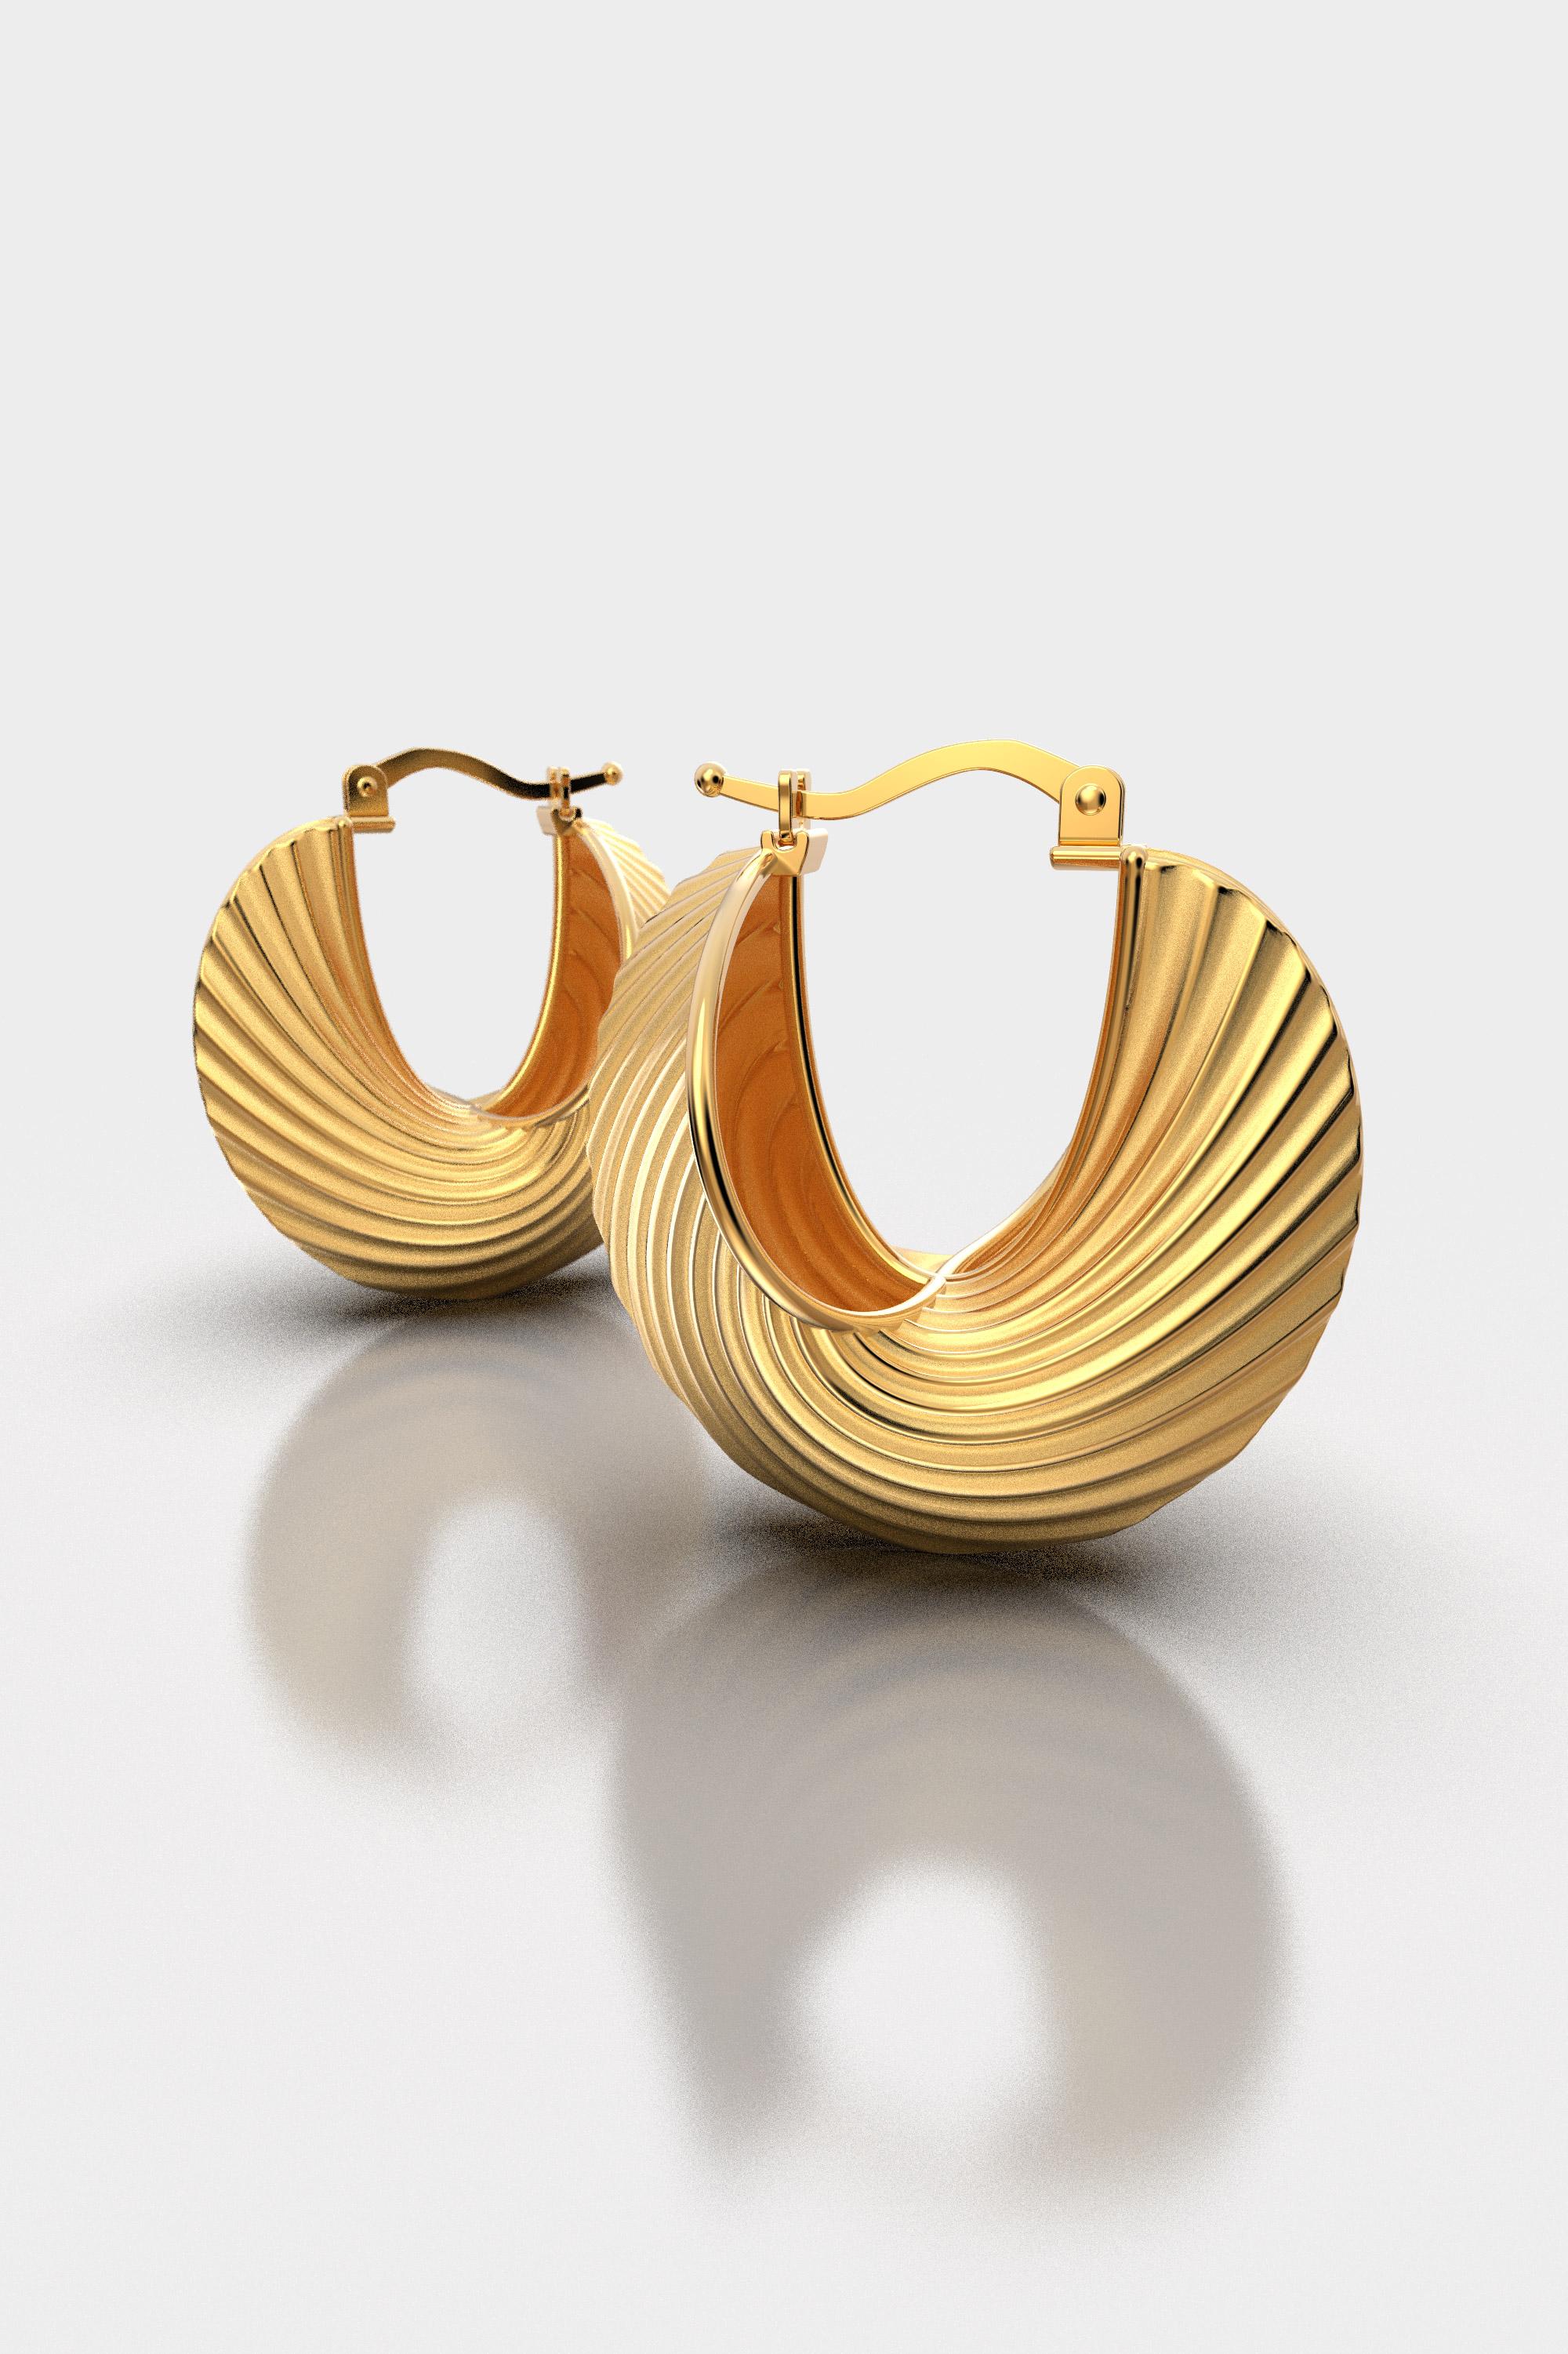 18K Solid Gold Hoop Earrings Designed and Crafted in Italy by Oltremare Gioielli In New Condition For Sale In Camisano Vicentino, VI